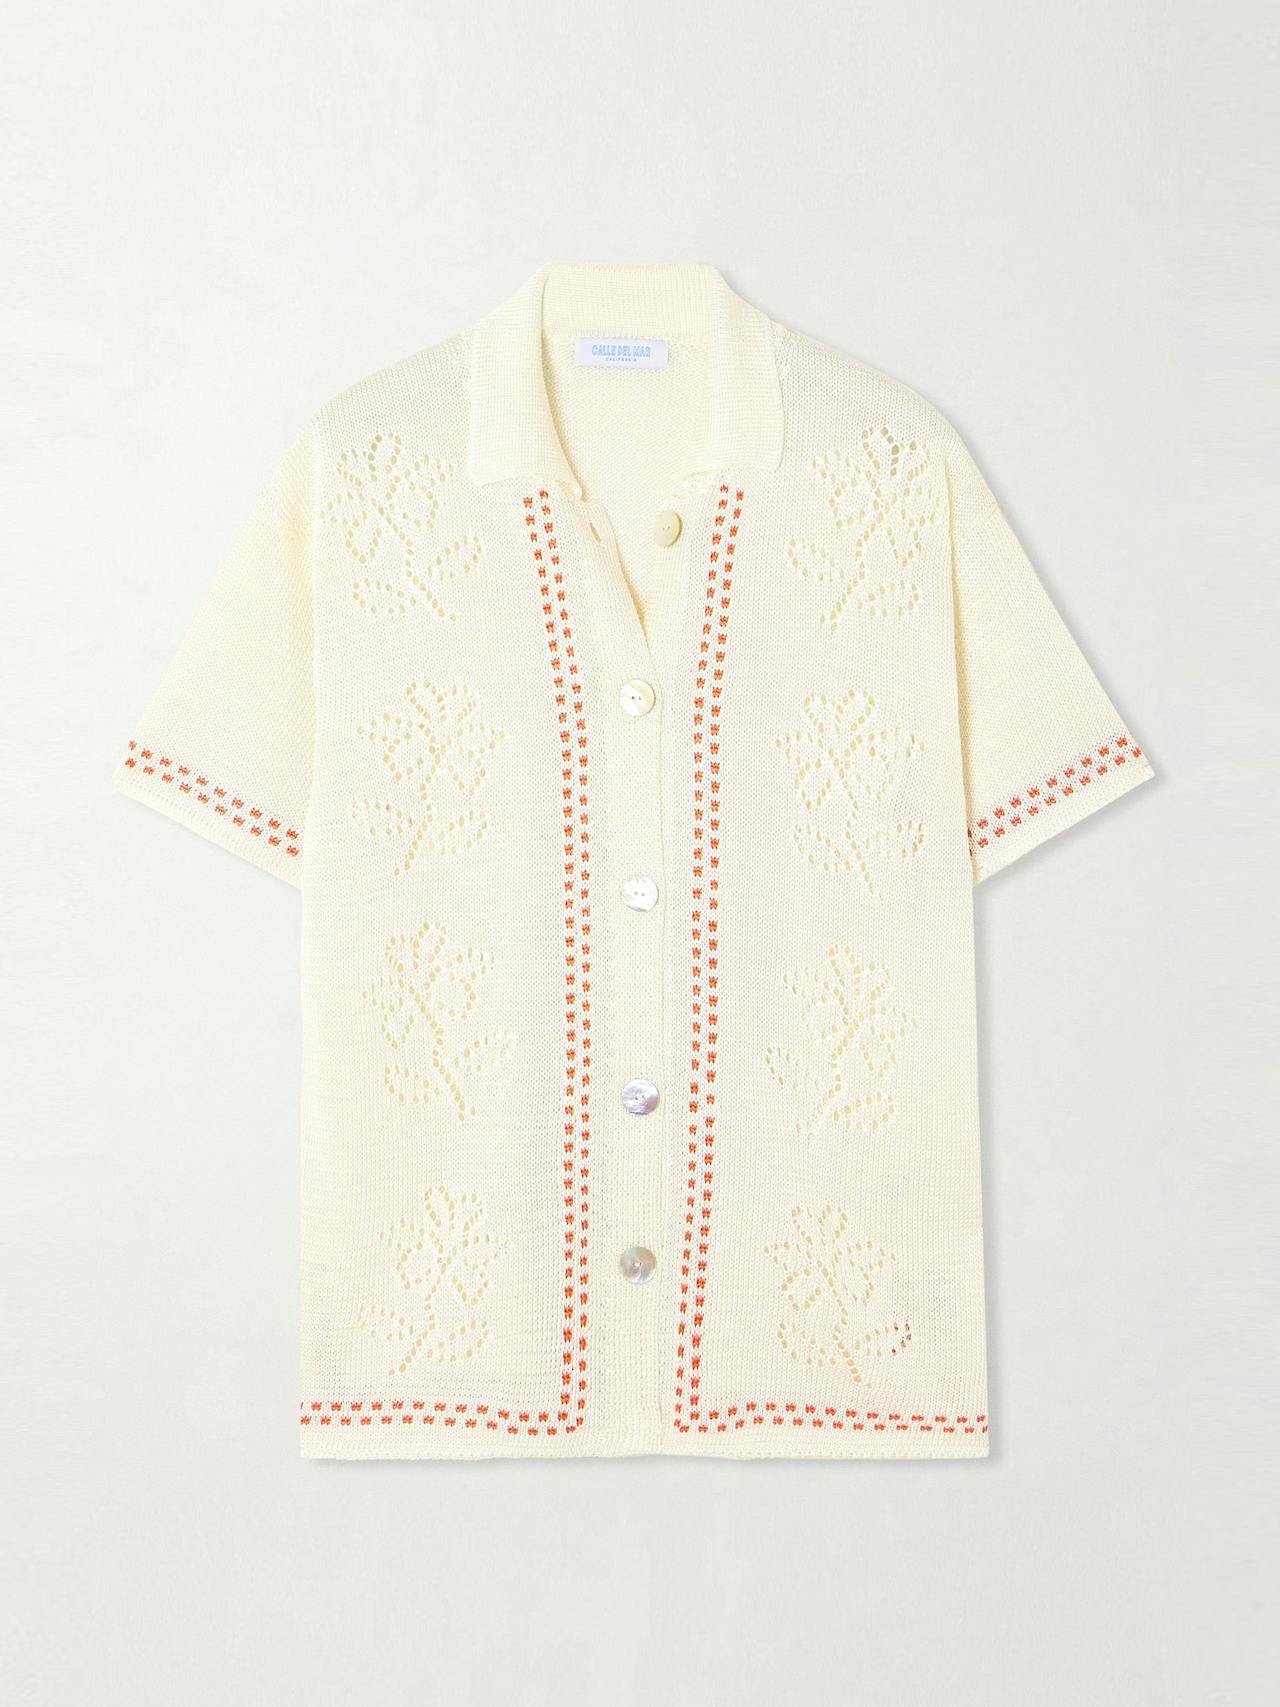 Dinner Party embroidered pointelle-knit shirt